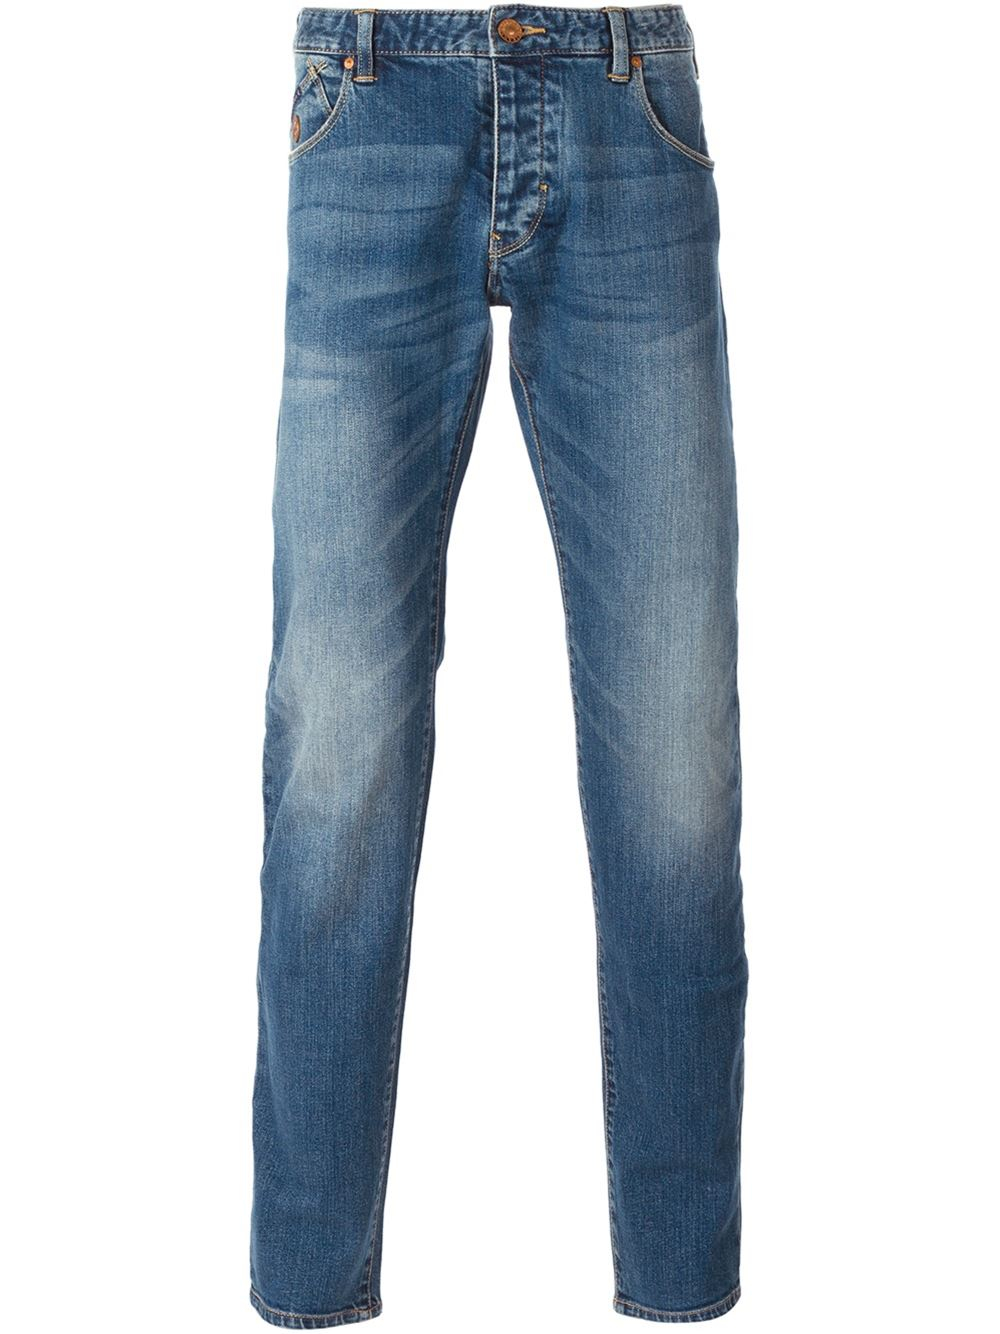 Armani jeans Stone Washed Jeans in Blue for Men | Lyst